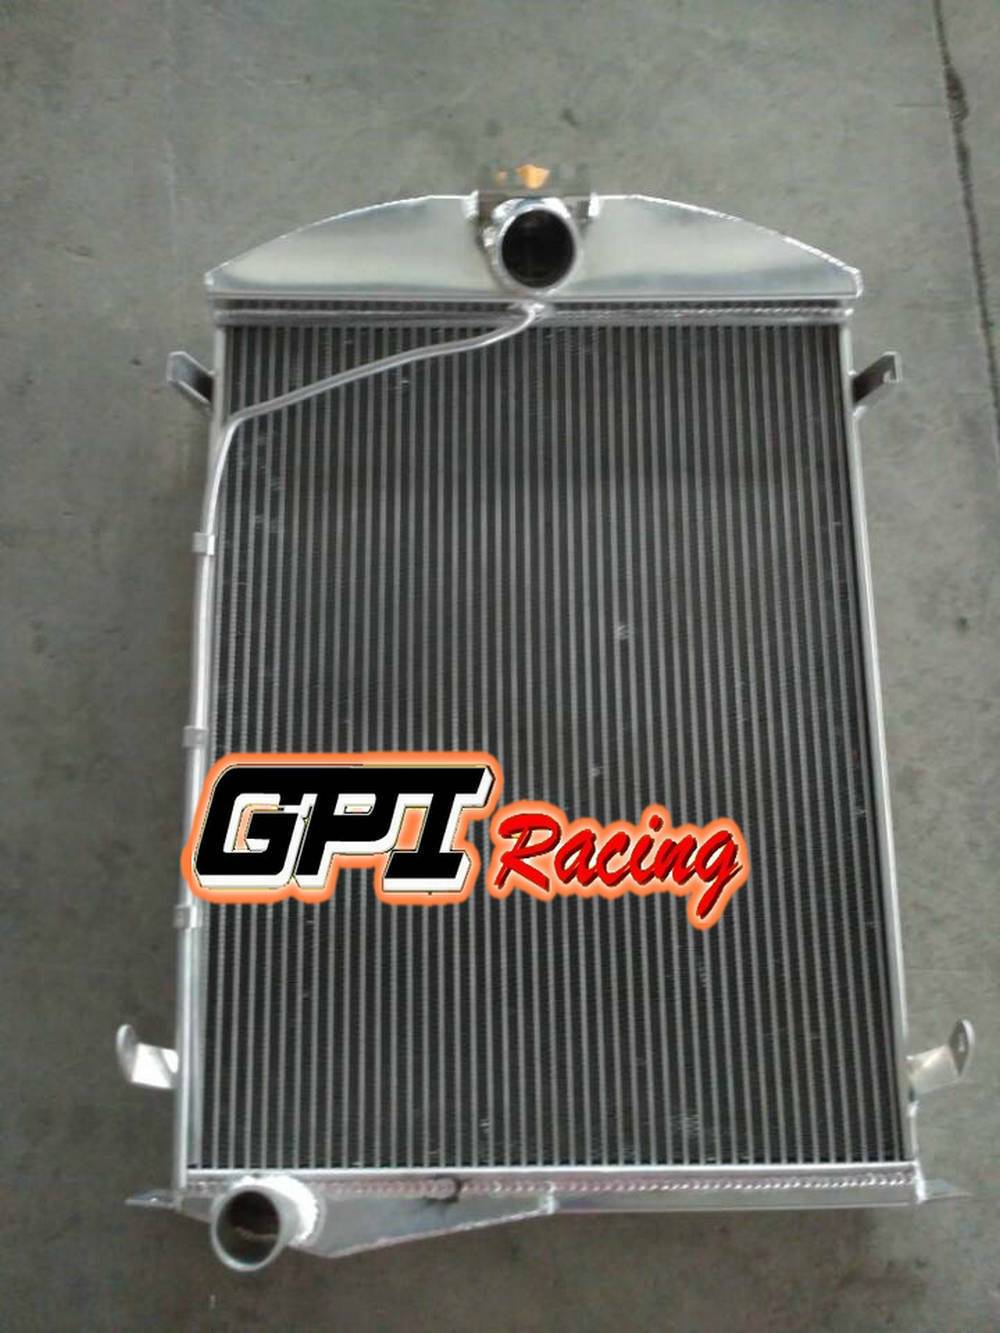 56MM 2 ROW ALUMINUM ALLOY RADIATOR FOR Ford Model A 1930 1931